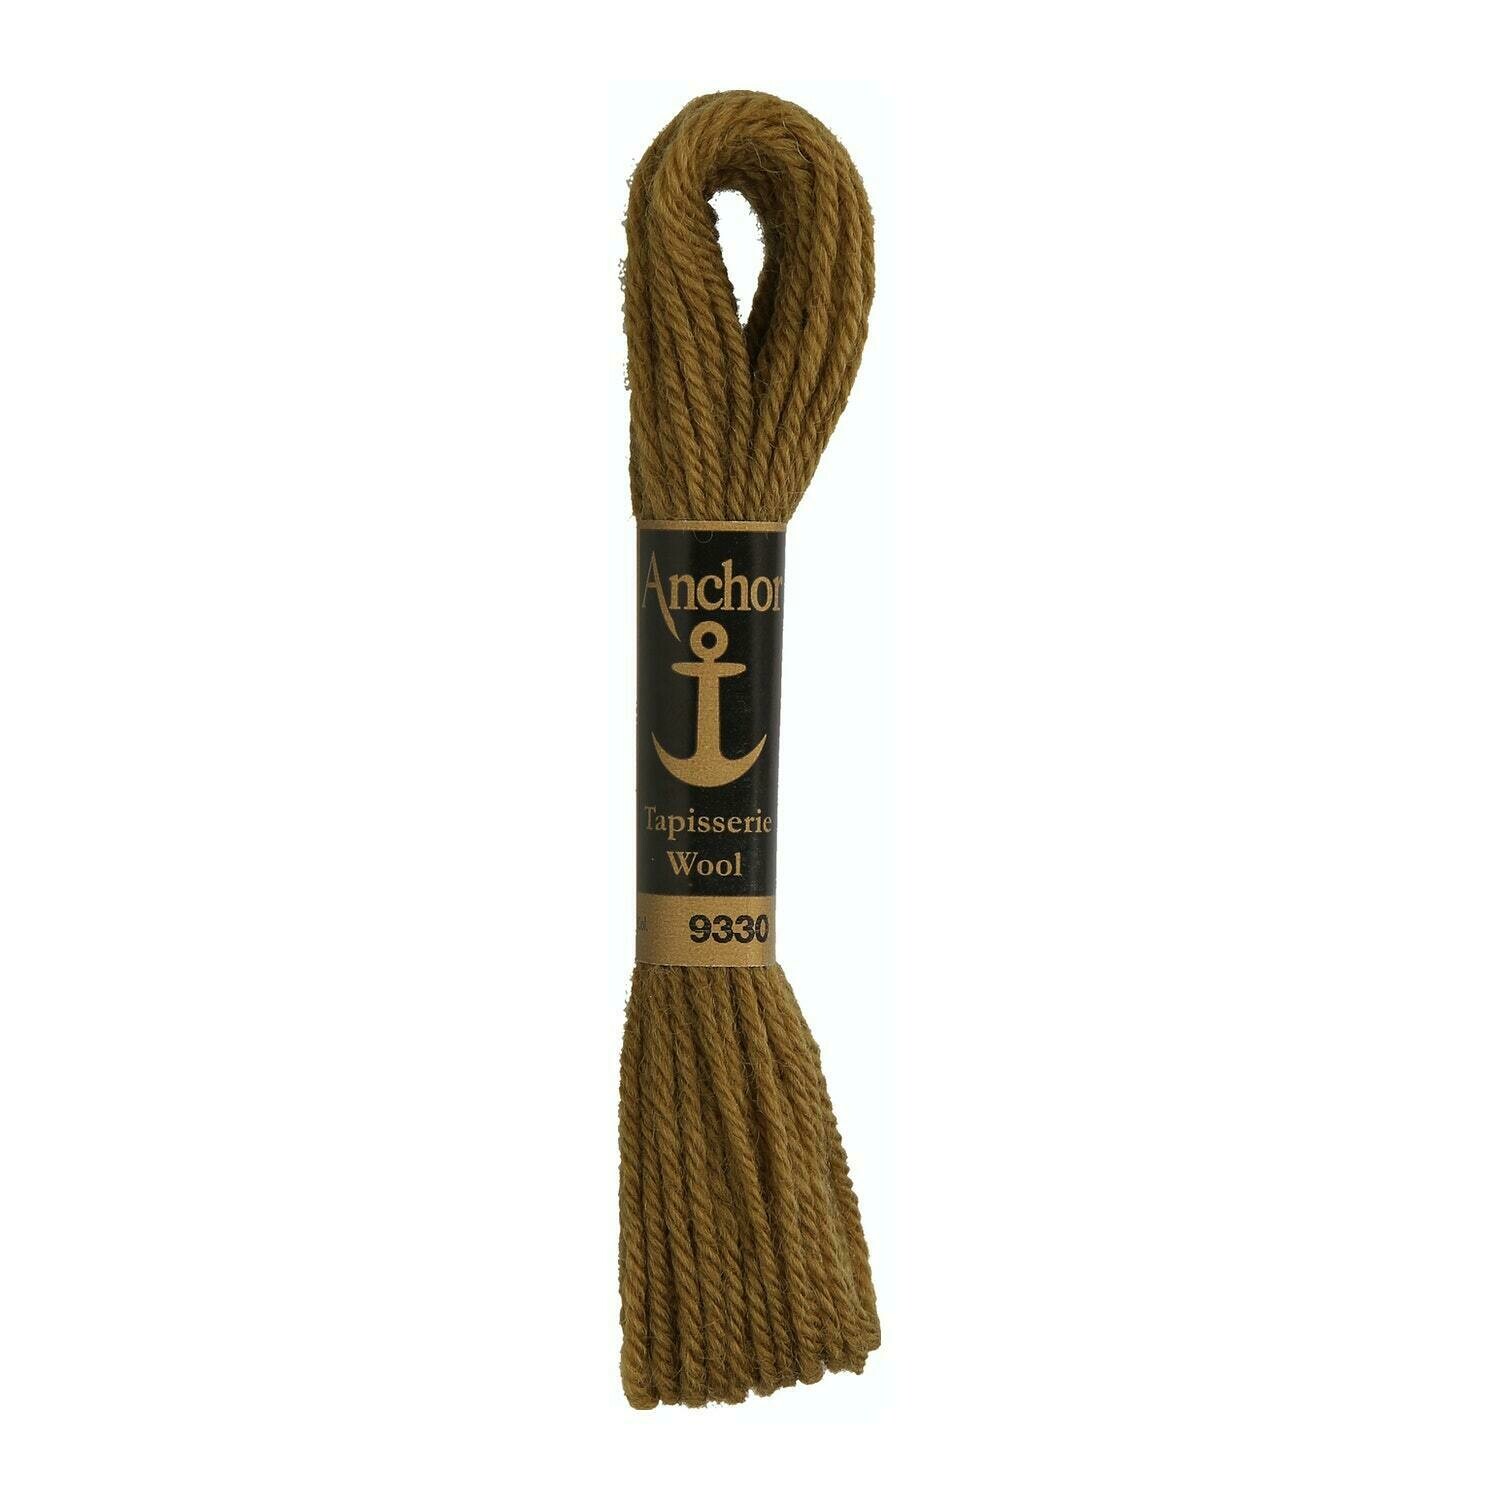 Anchor Tapisserie Wool #09330